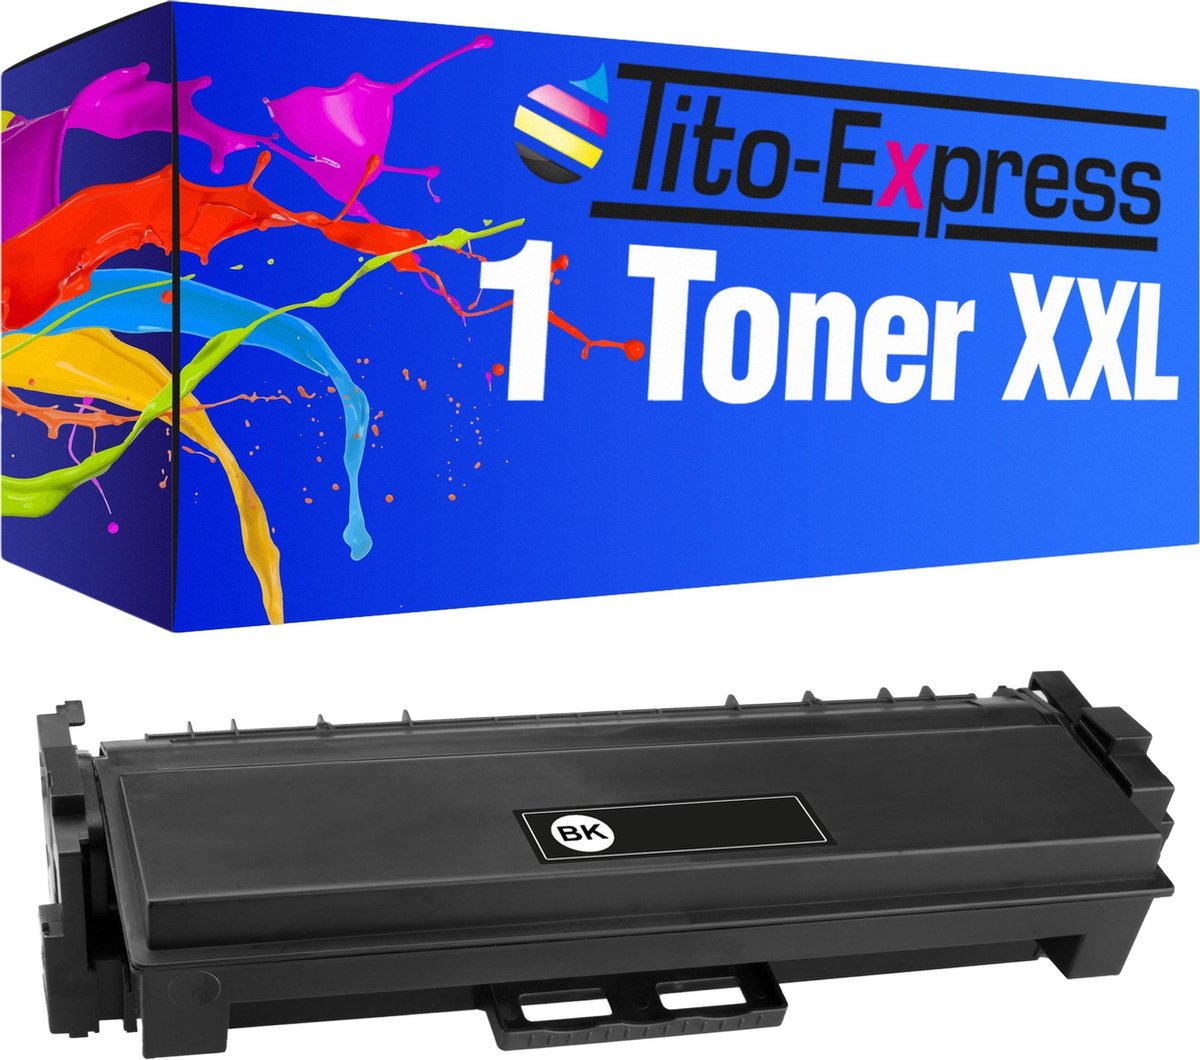 PlatinumSerie 1x toner alternatief voor HP W2070A 117A XXL Black 150 150a 150nw MFP 170 178nw 178nwg 179fng 179fnw 179fwg